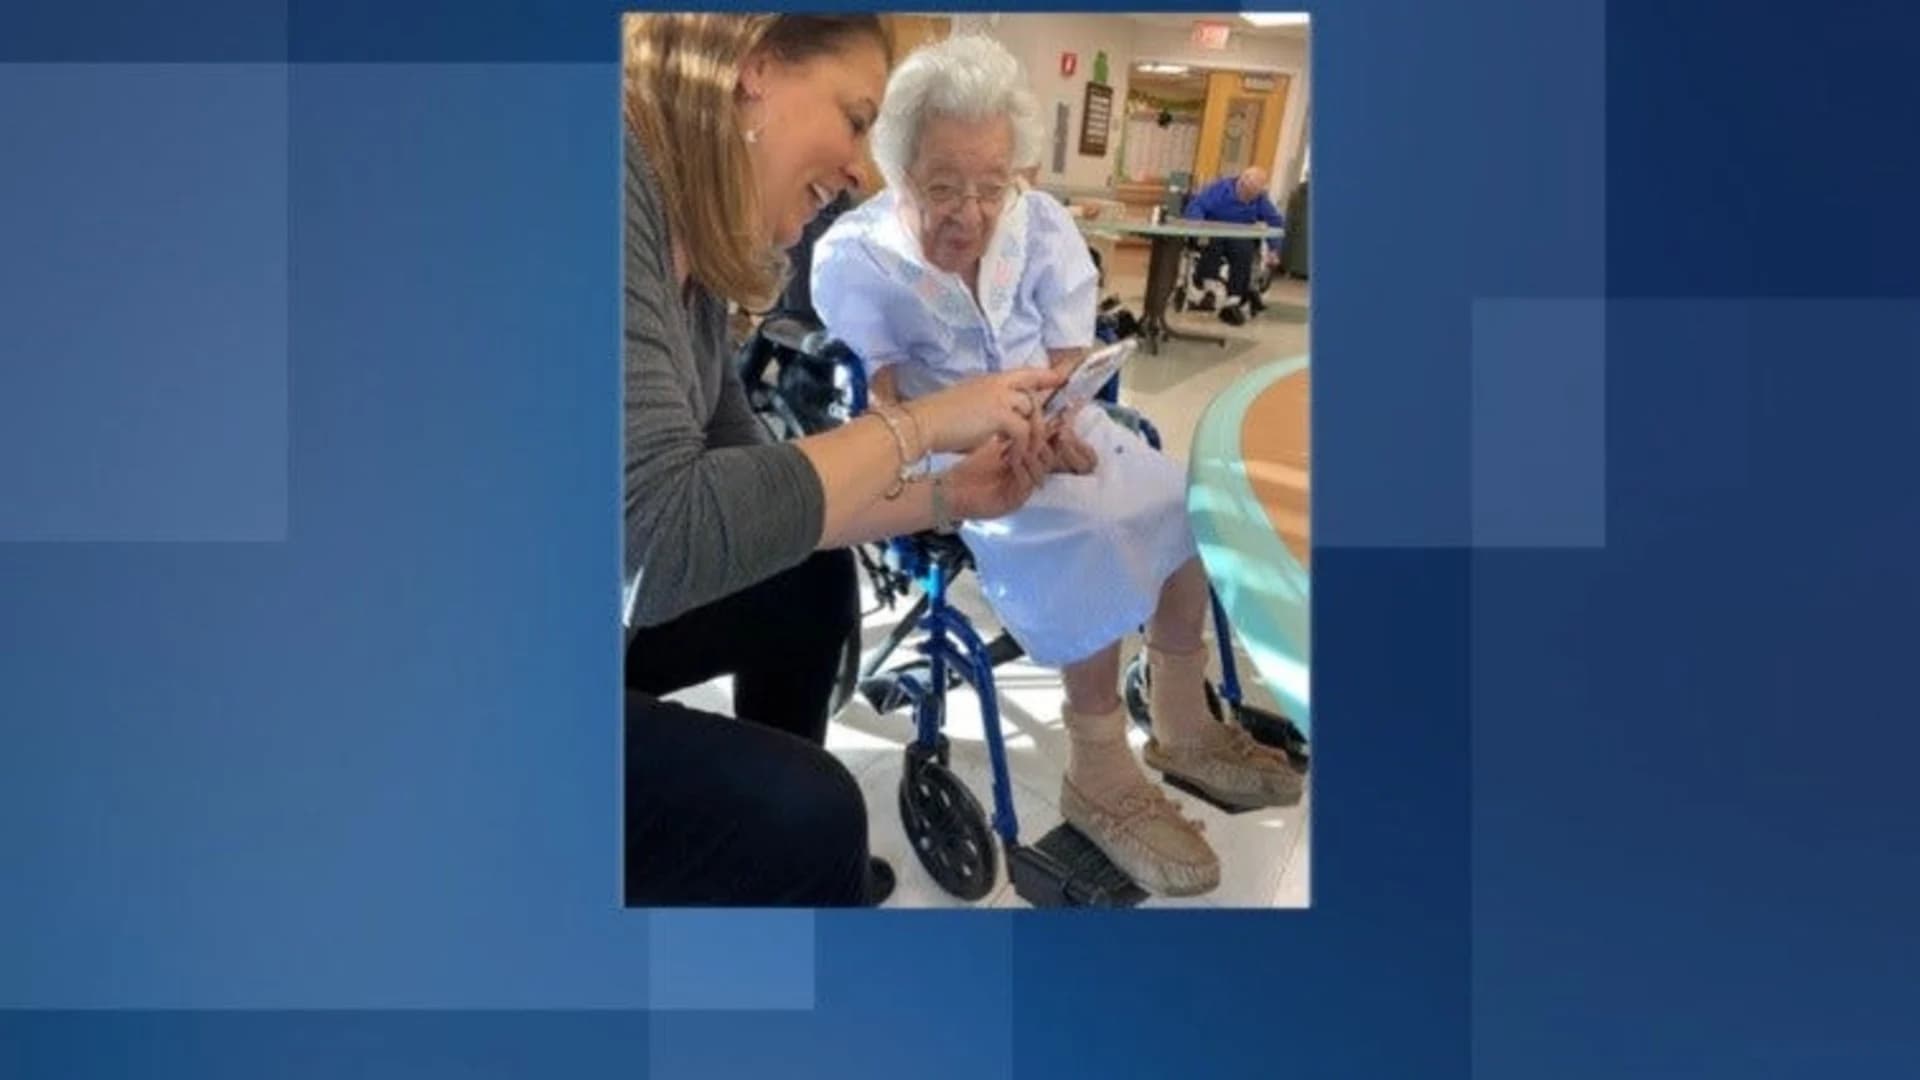 Nutley woman who had COVID-19 expected to be released from hospital Saturday on 107th birthday